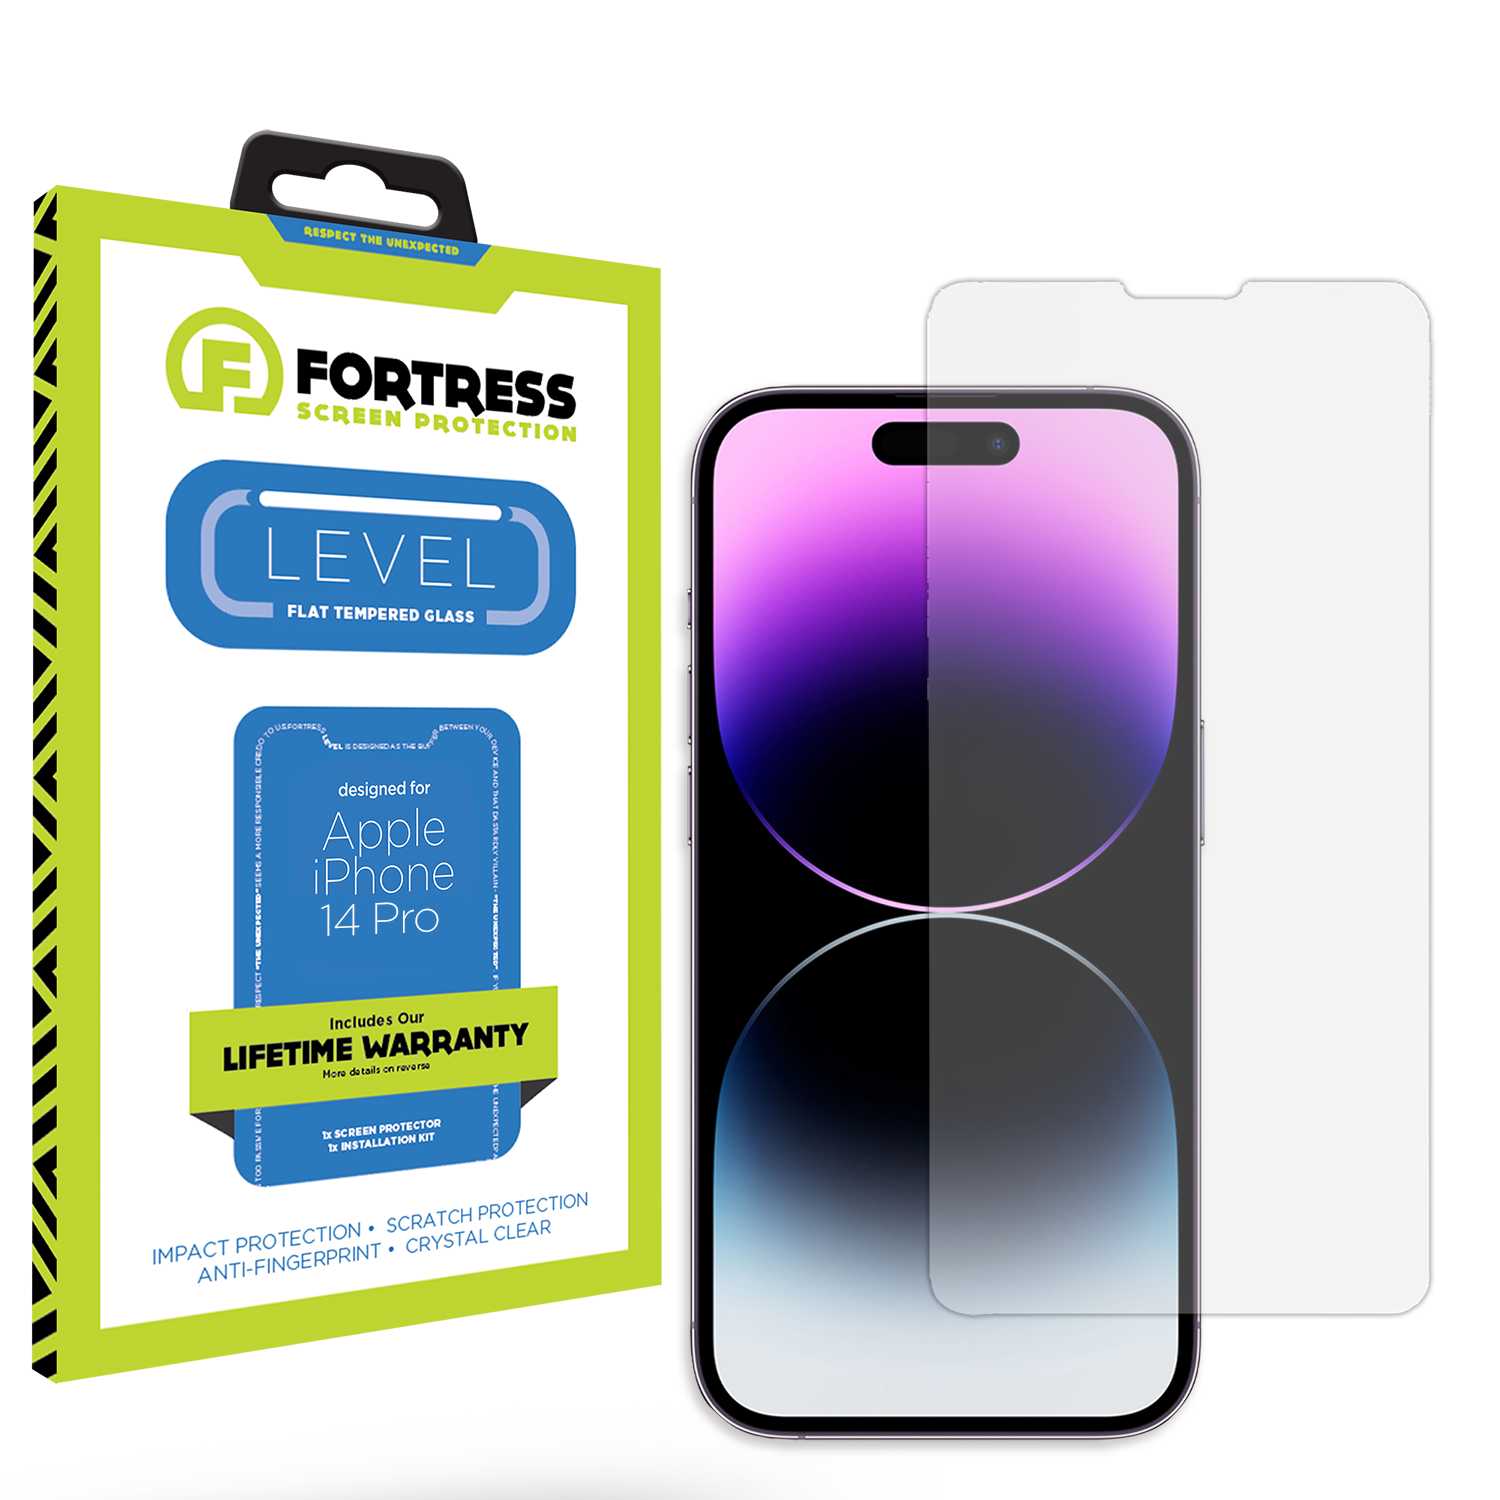 Fortress iPhone 14 Pro Screen Protector $0Coverage Scooch Screen Protector